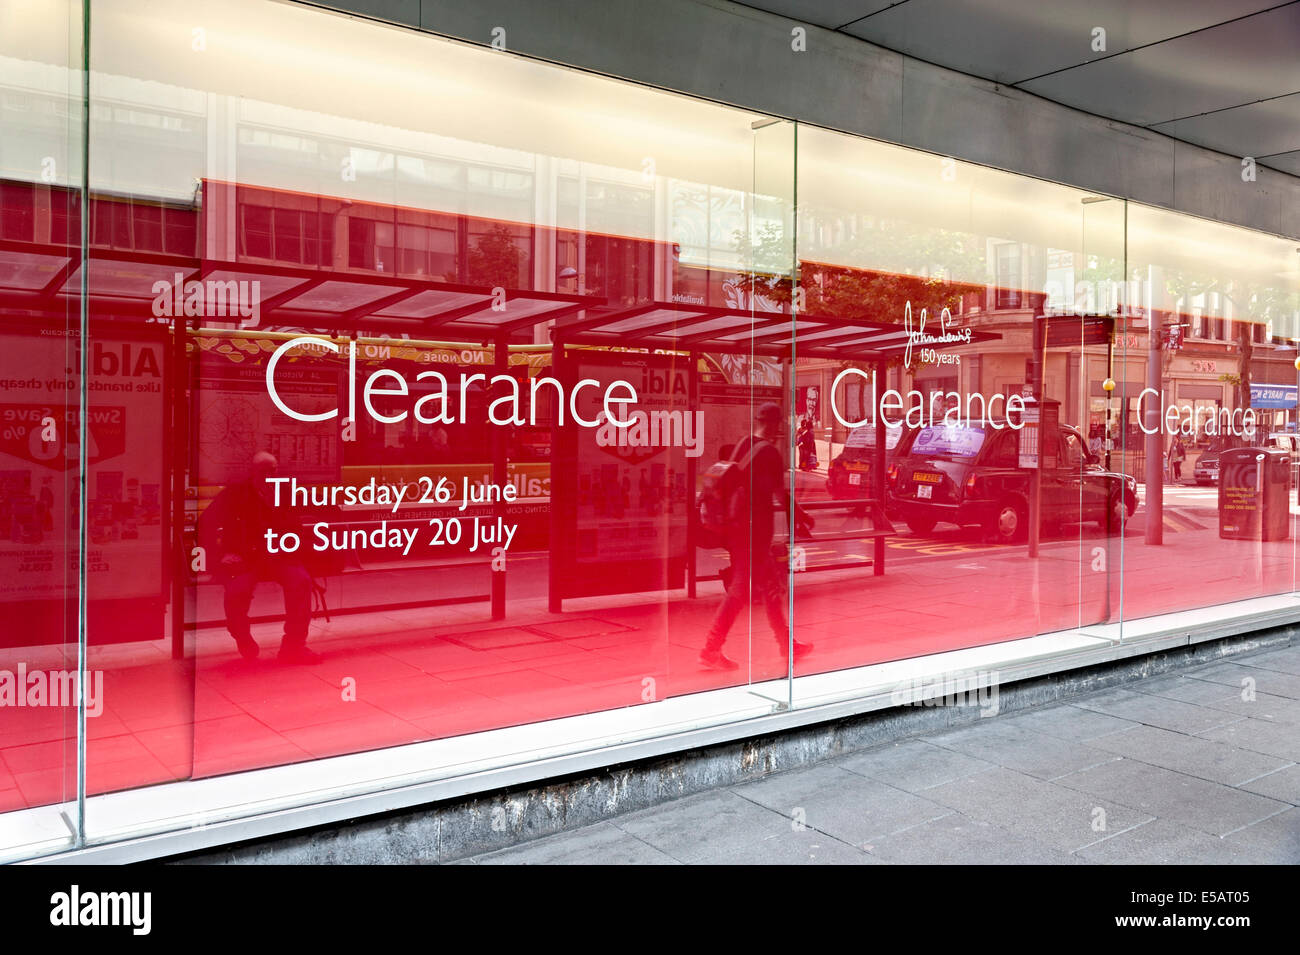 John lewis department store clearance sale sign nottingham Stock Photo: 72153093 - Alamy